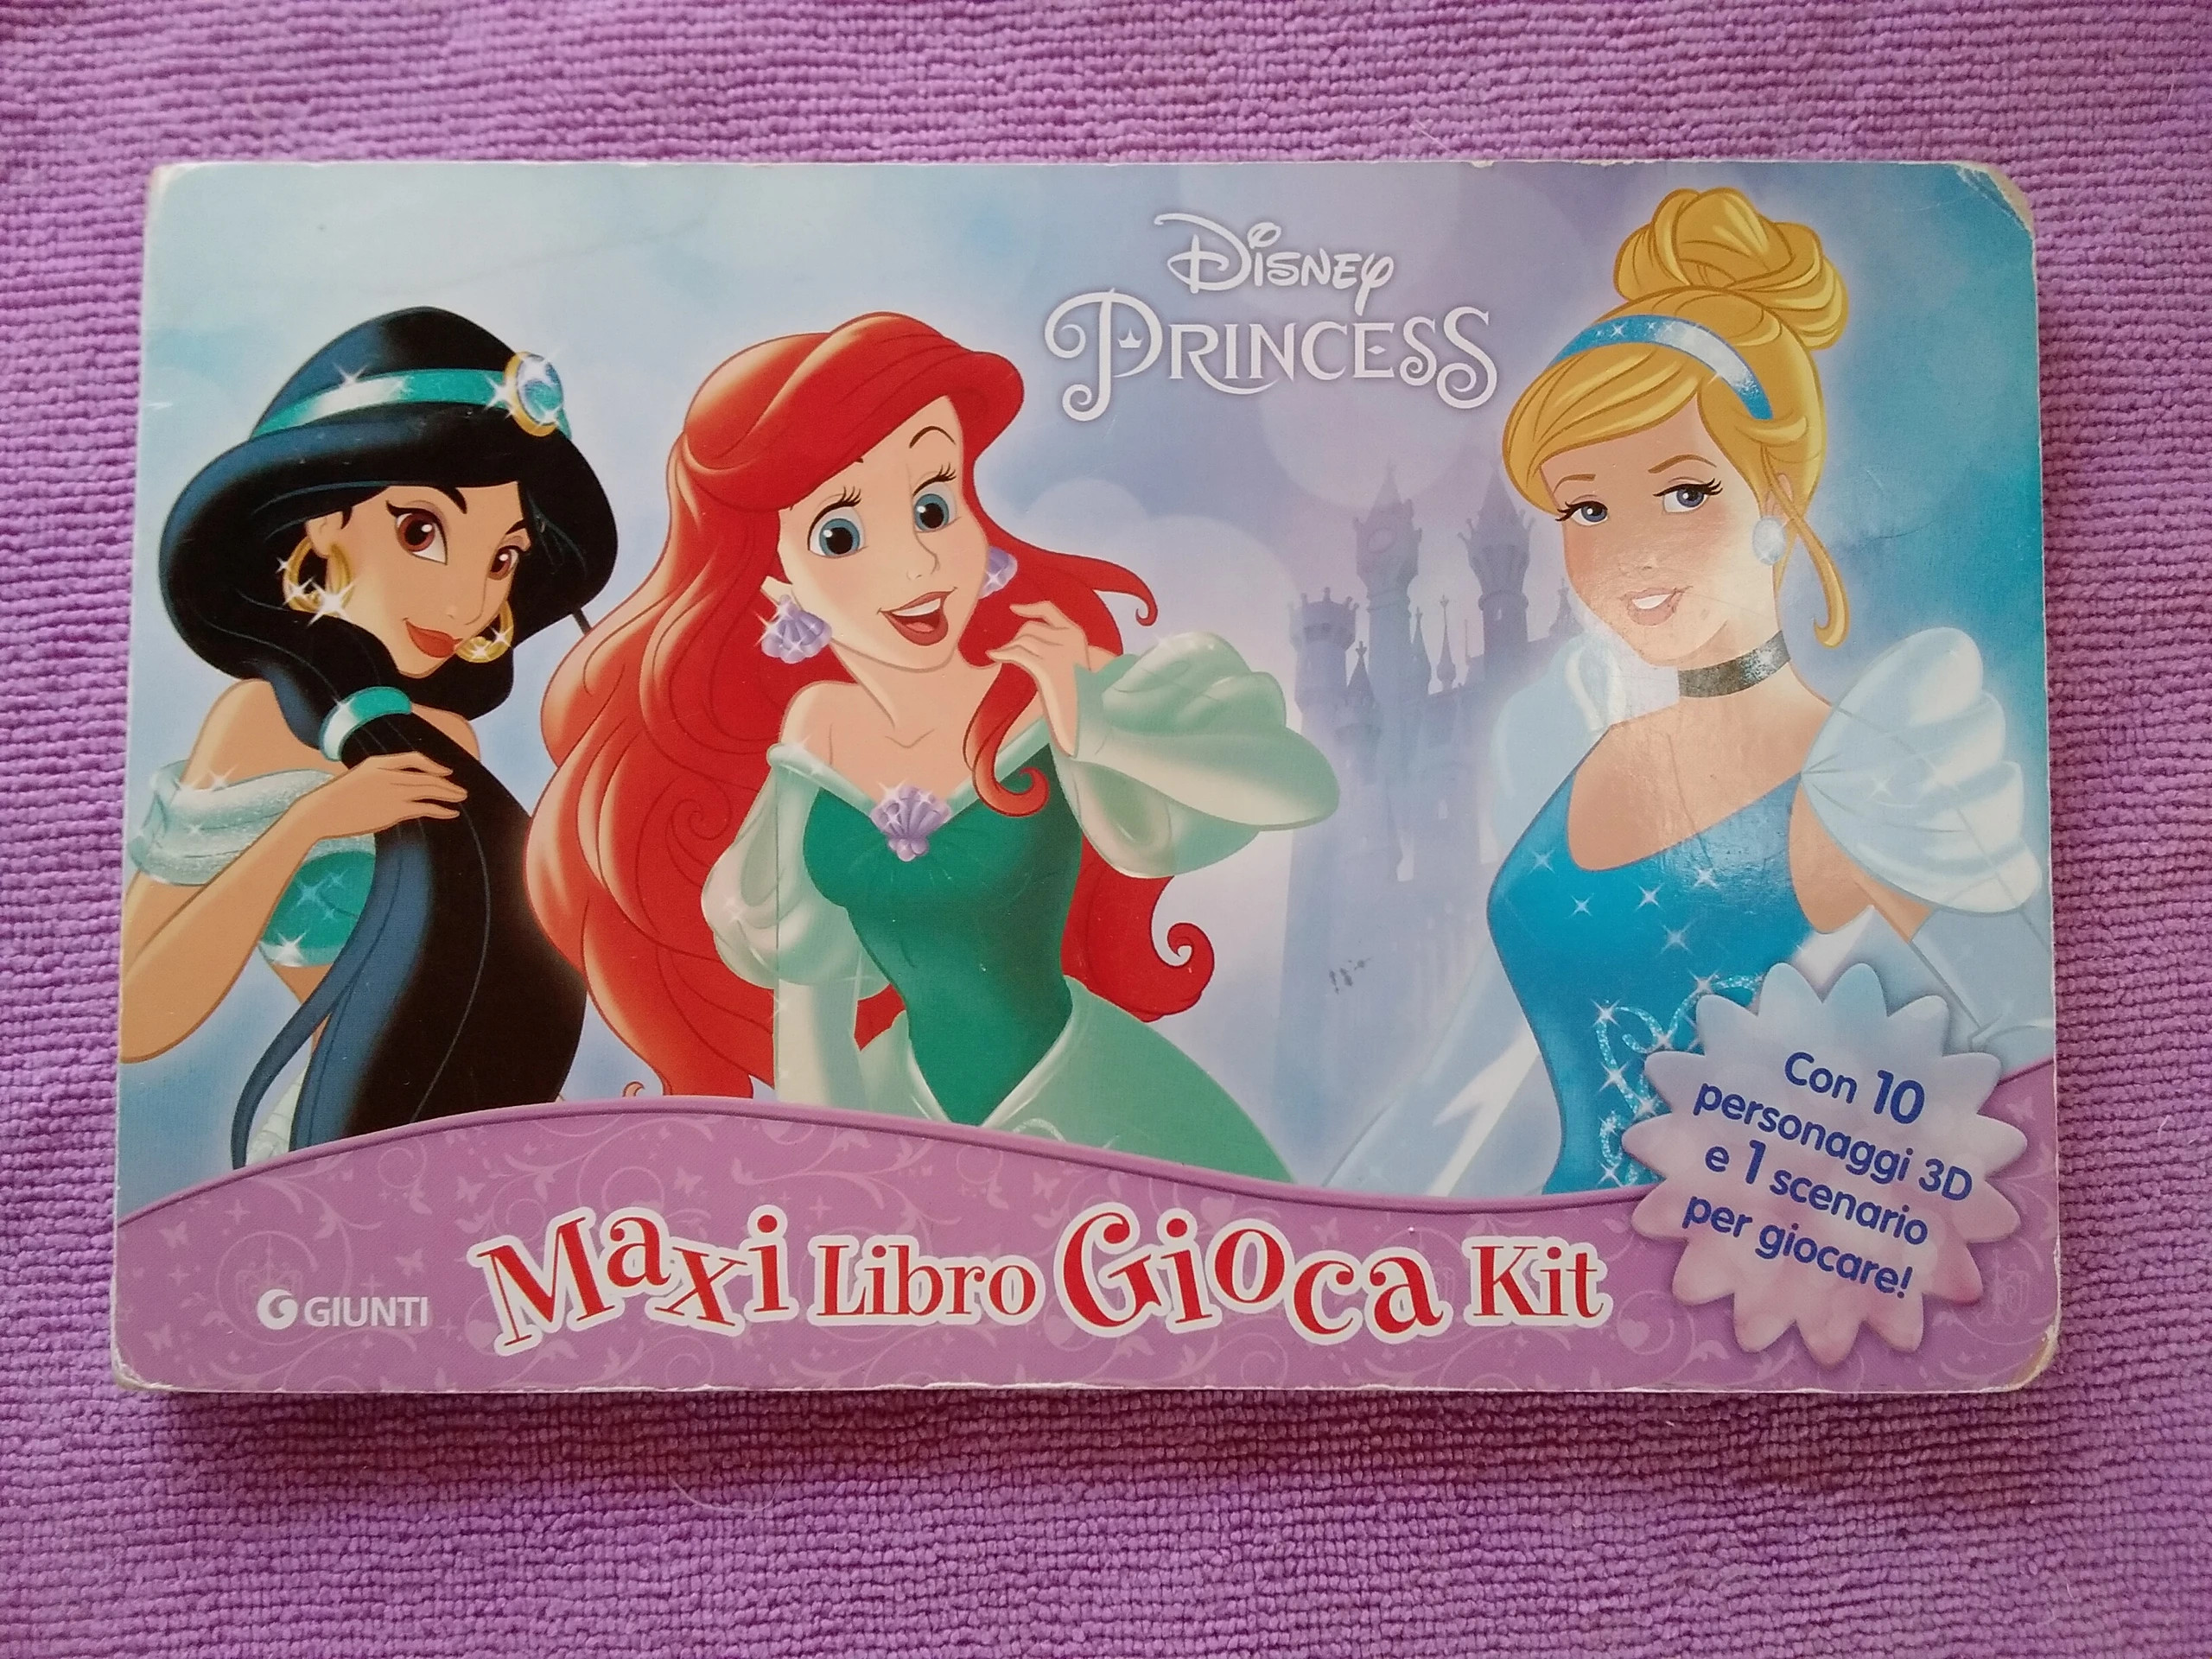 Book Disney Princesses italian. Strong Cardboard book for kids.  illustrated story. Collection item